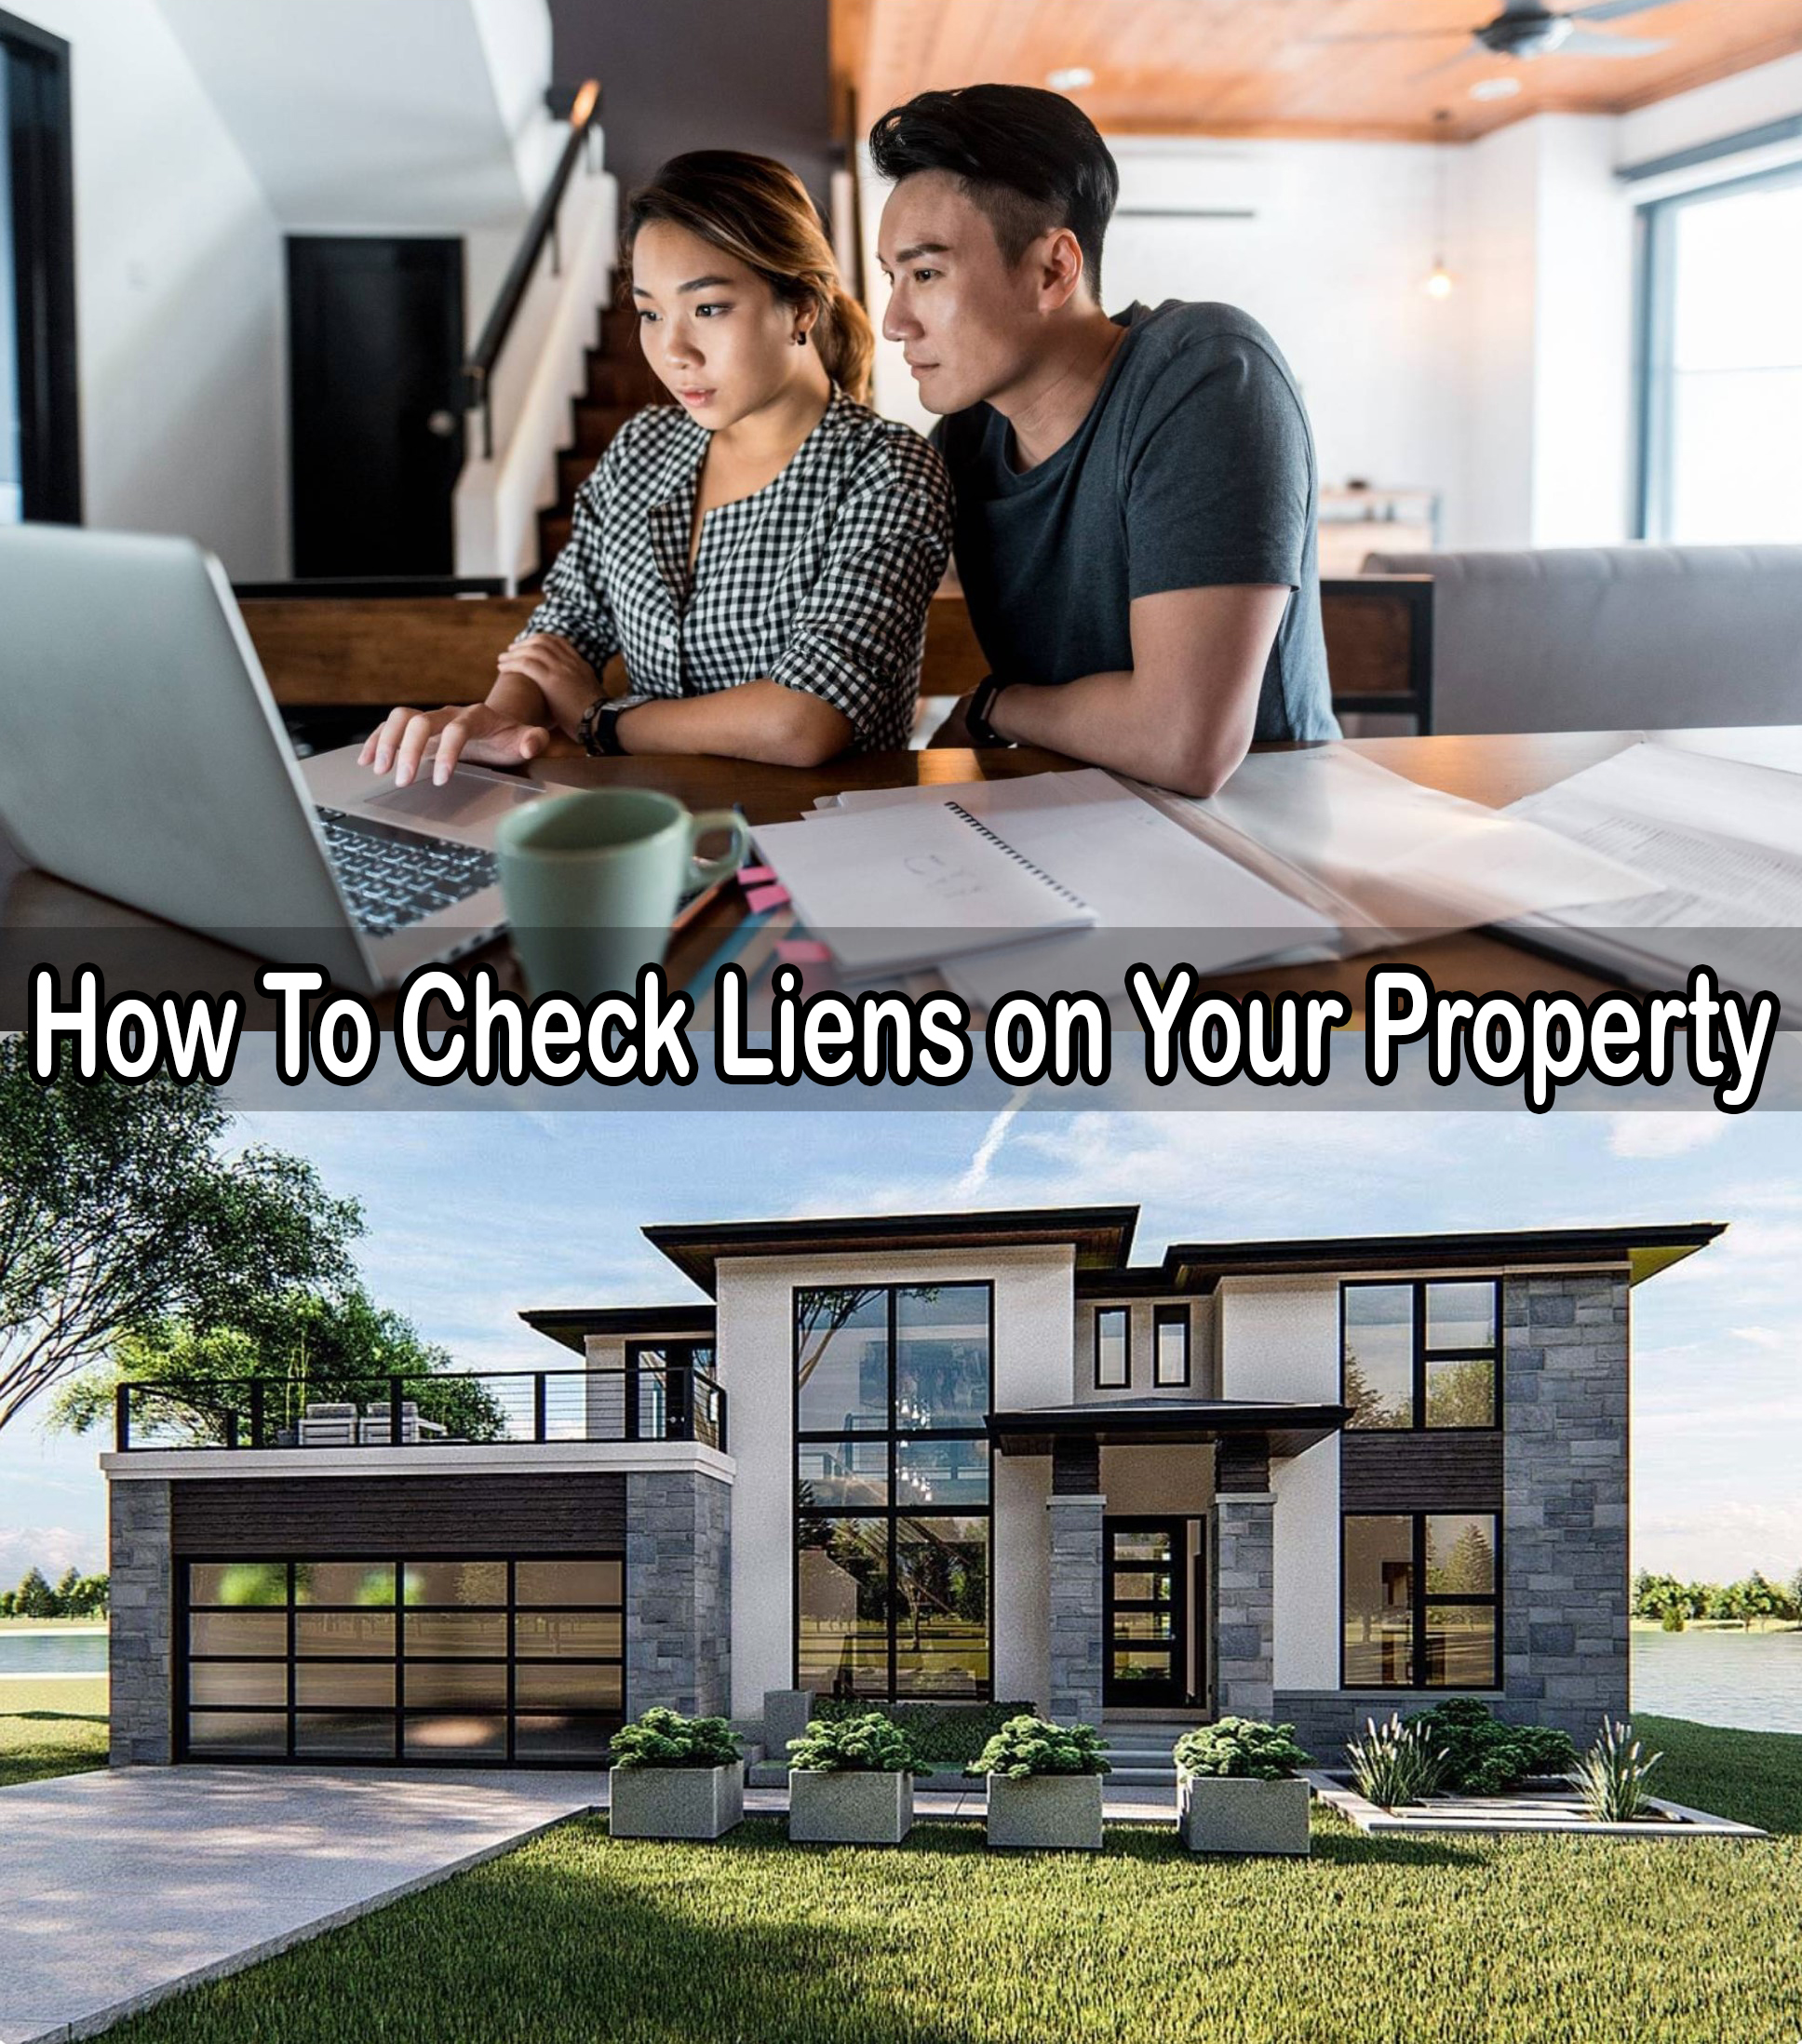 How To Check Liens on Your Property